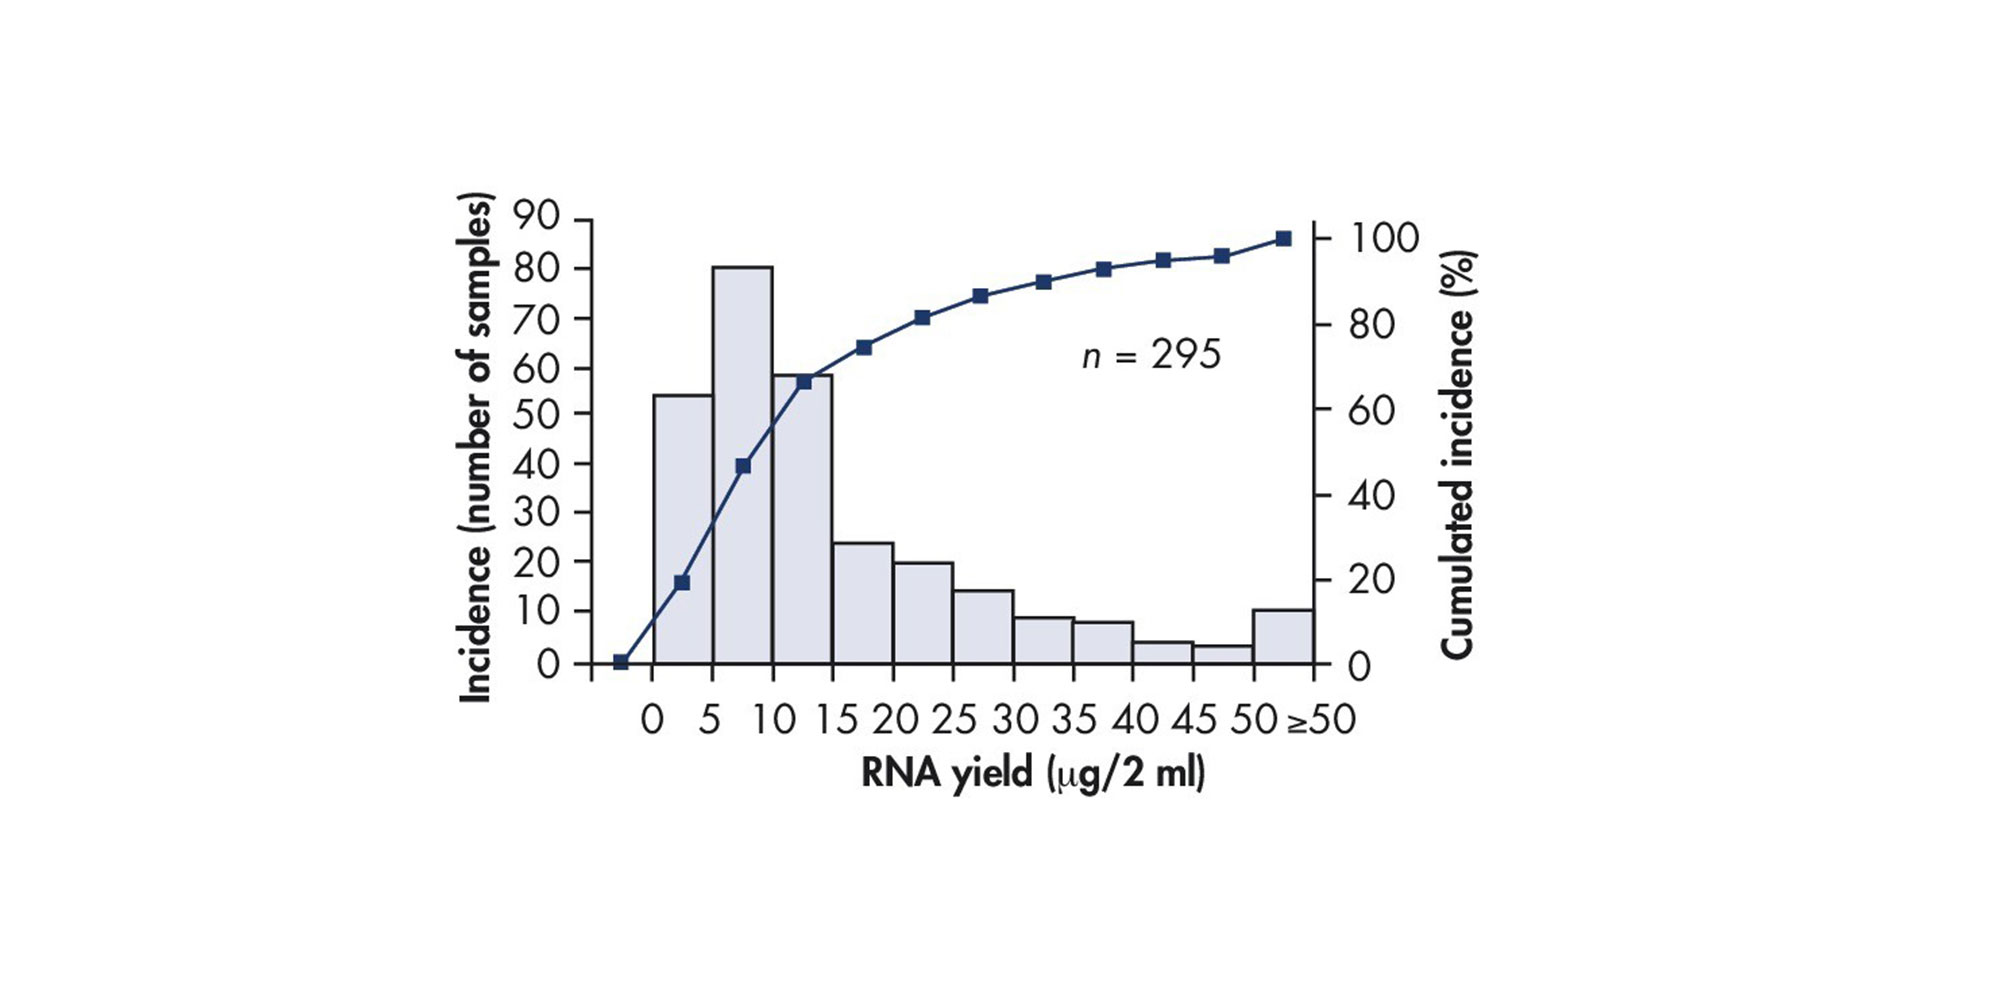 Bone marrow samples were stabilized in PAXgene Bone Marrow RNA Tubes, and RNA was purified using the PAXgene Bone Marrow RNA Kit. Yields are indicated for 295 samples, from both in-house and external studies. The median yield for the 295 samples was 11.0 μg RNA per 2 ml sample. Note that RNA yields can vary greatly due to the extreme heterogeneity of bone marrow samples.